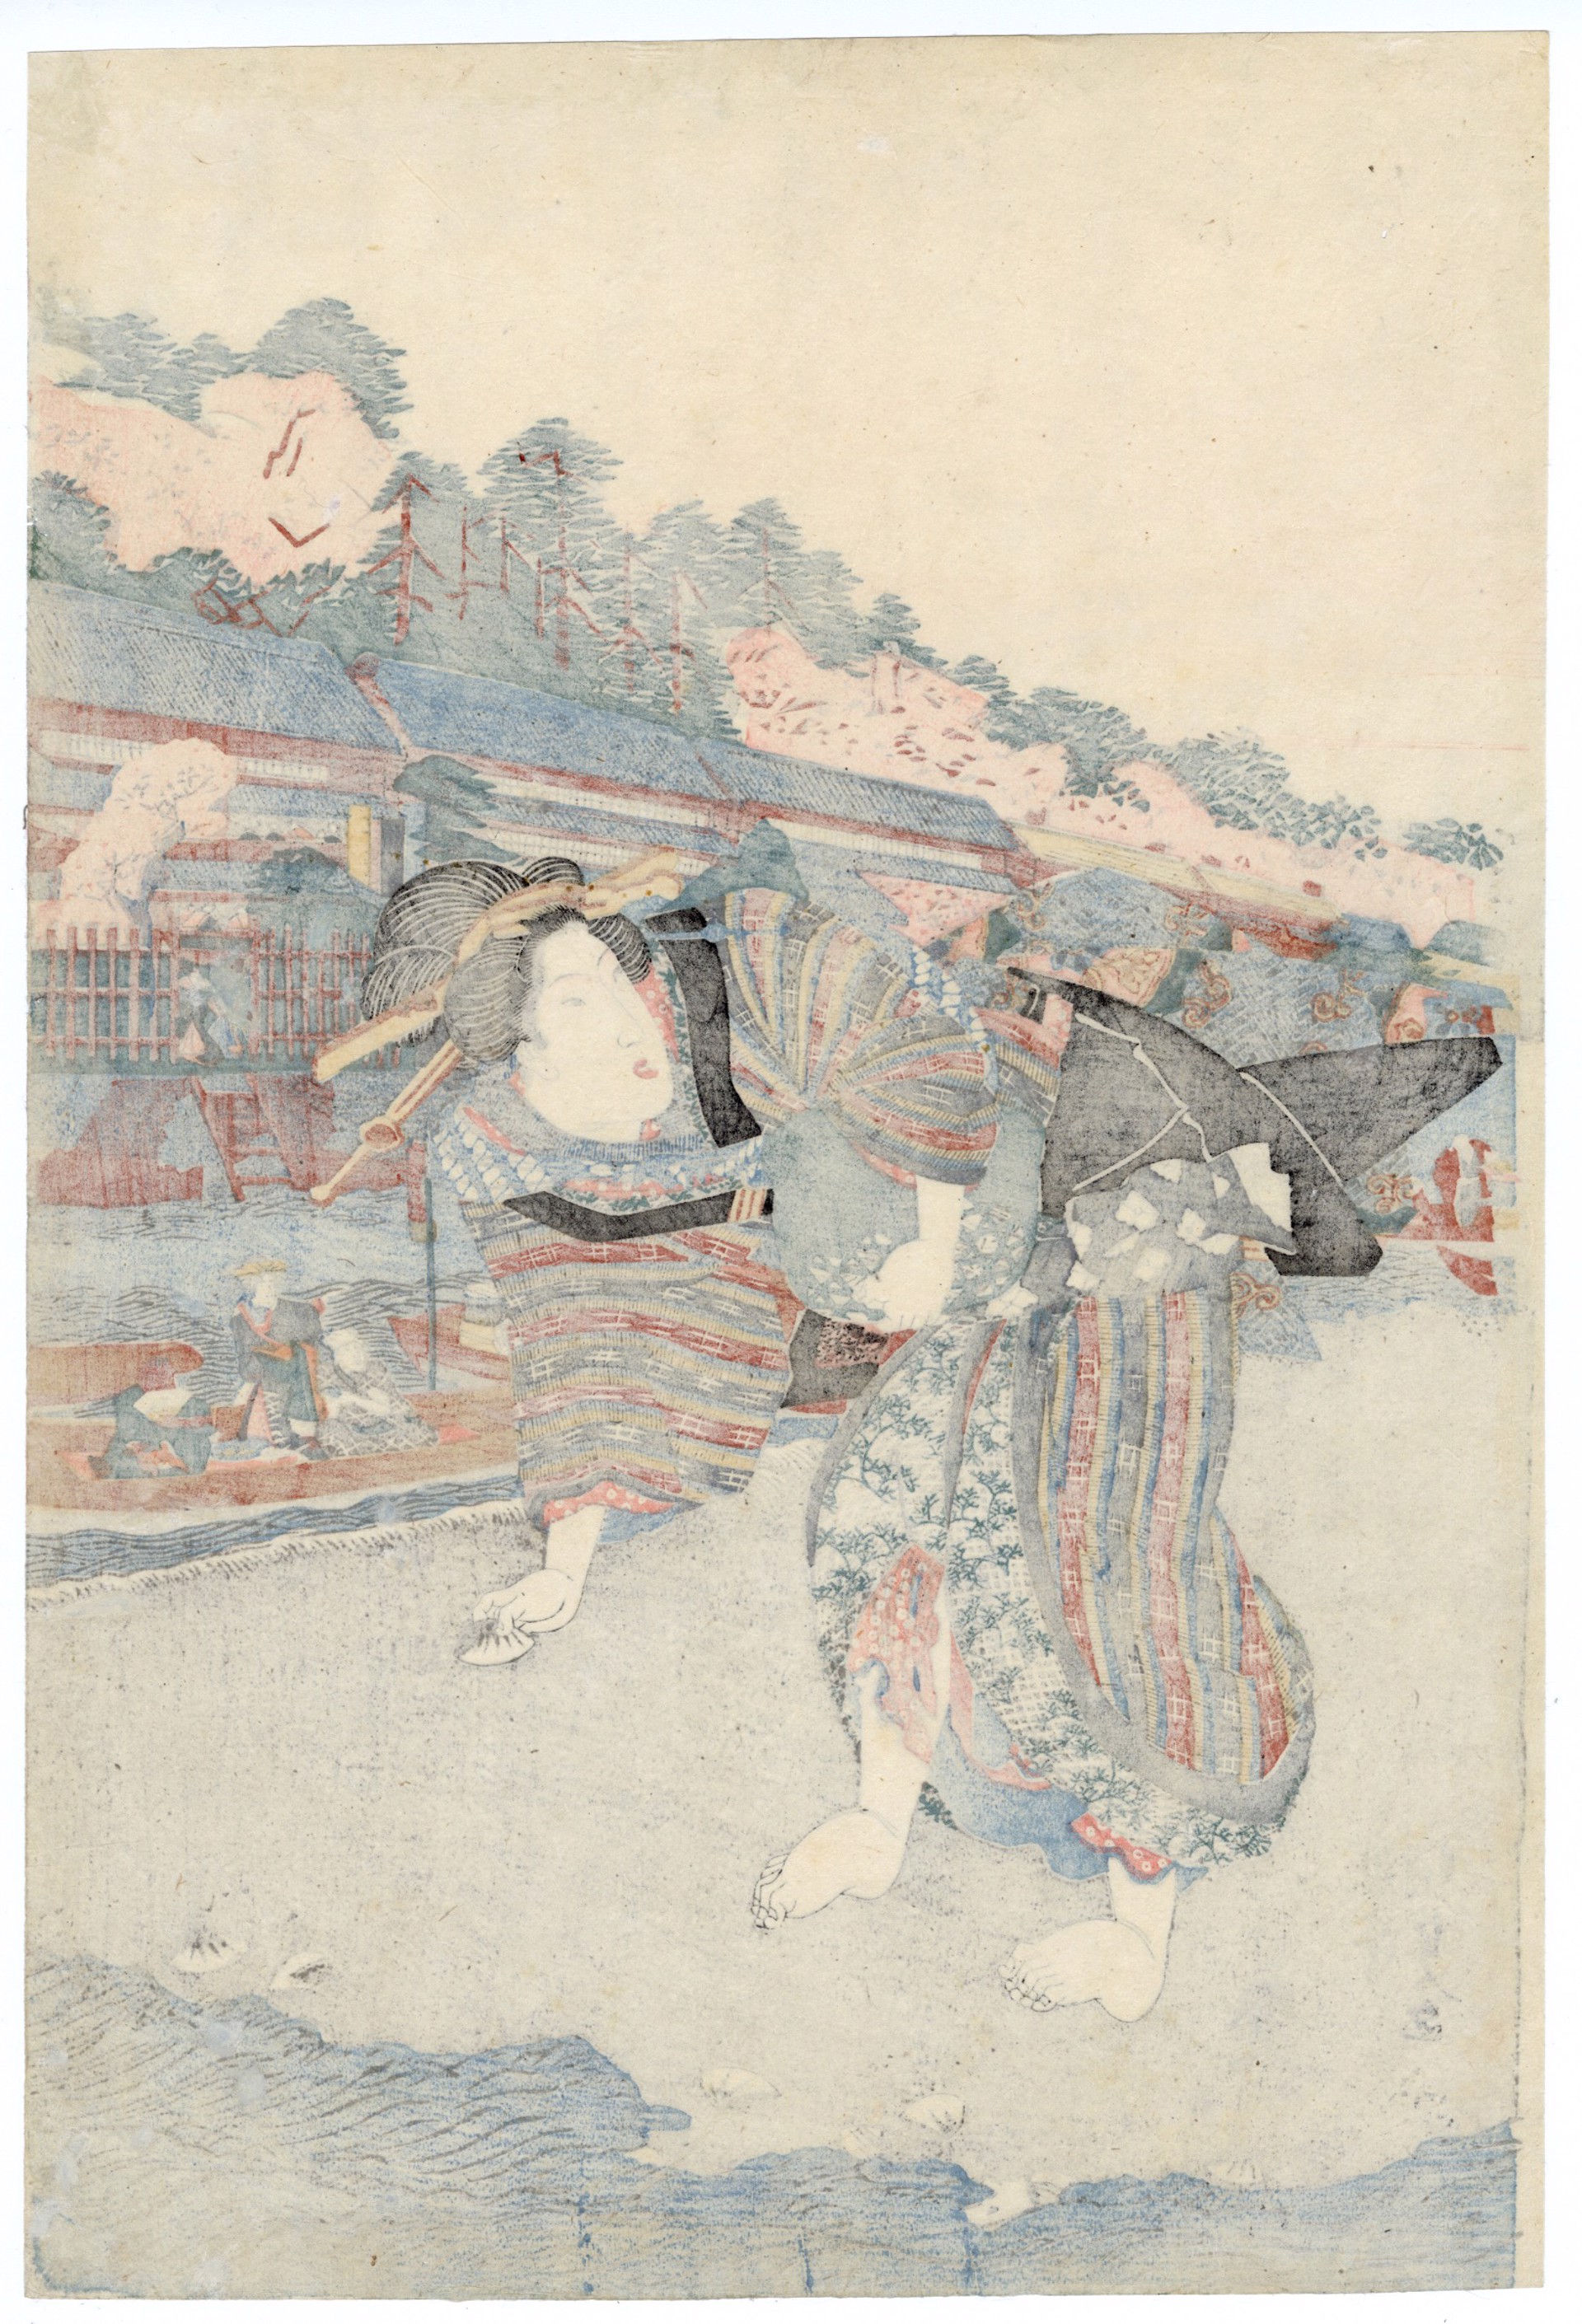 A Scene at Low Tide: Clamming by Kunisada